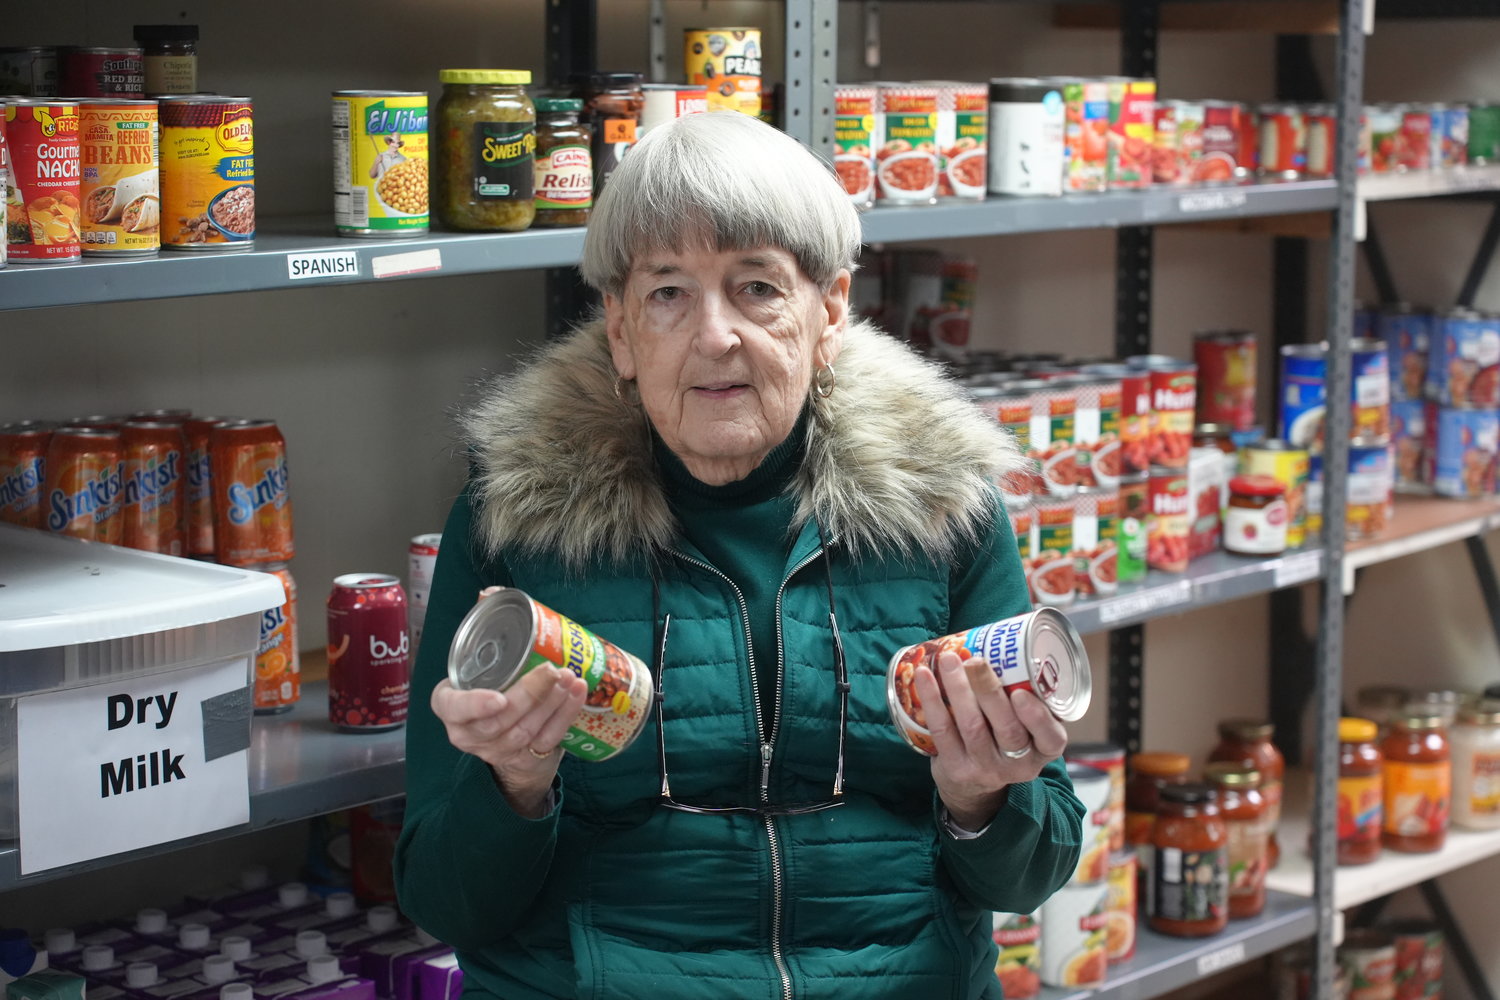 Sister Margie Kelly, the director of parish outreach at the Saint Vincent de Paul food pantry program at Holy Name of Mary Church, works with volunteers to clean and stock the pantry.